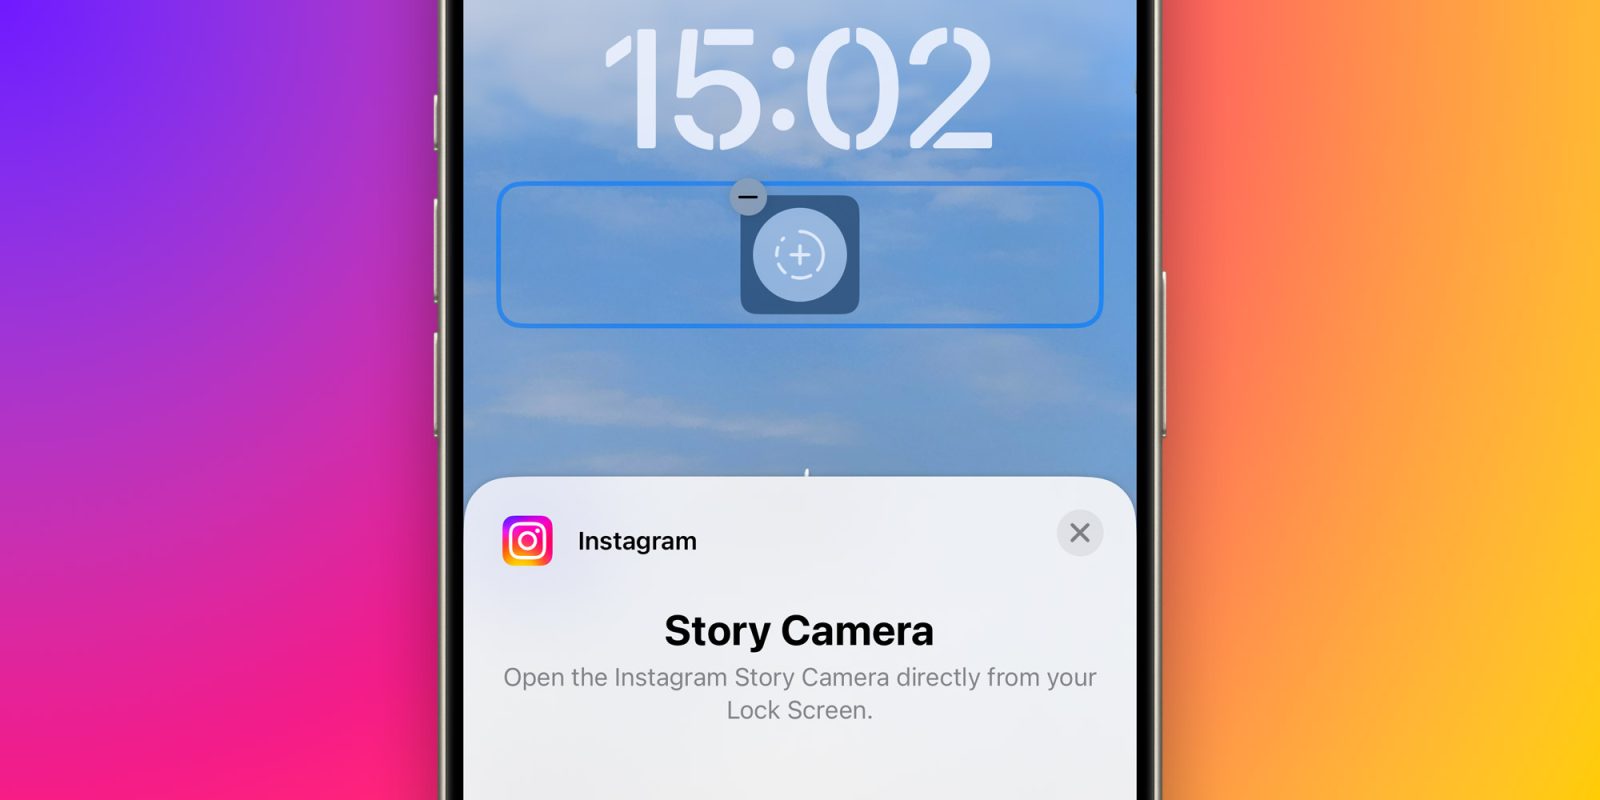 Instagram rolling out widget that opens the Story Camera right from the Lock Screen